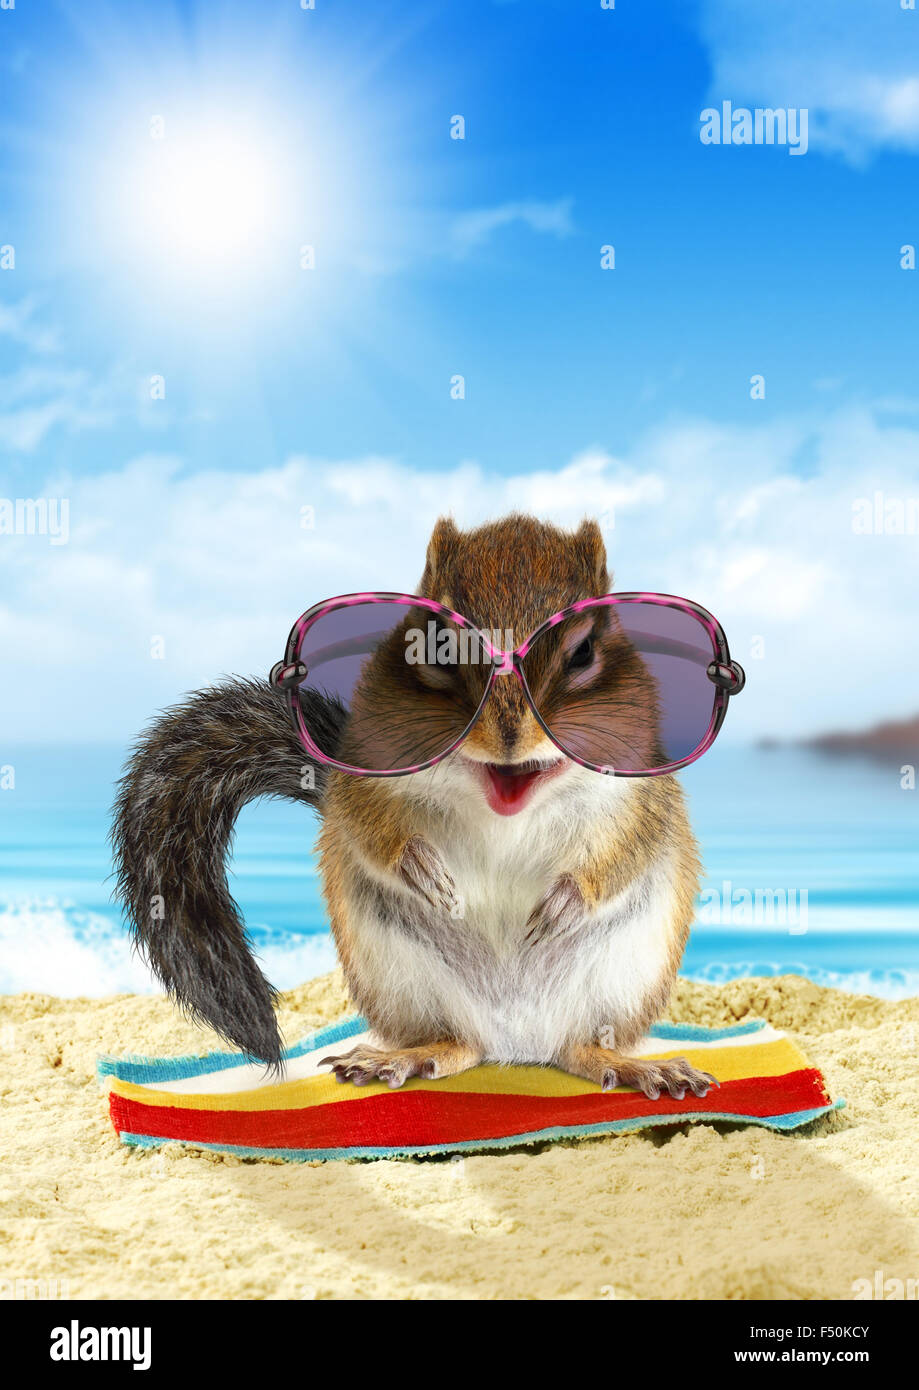 Funny animal on summer holiday, squirrel on the beach with sunglasses Stock Photo